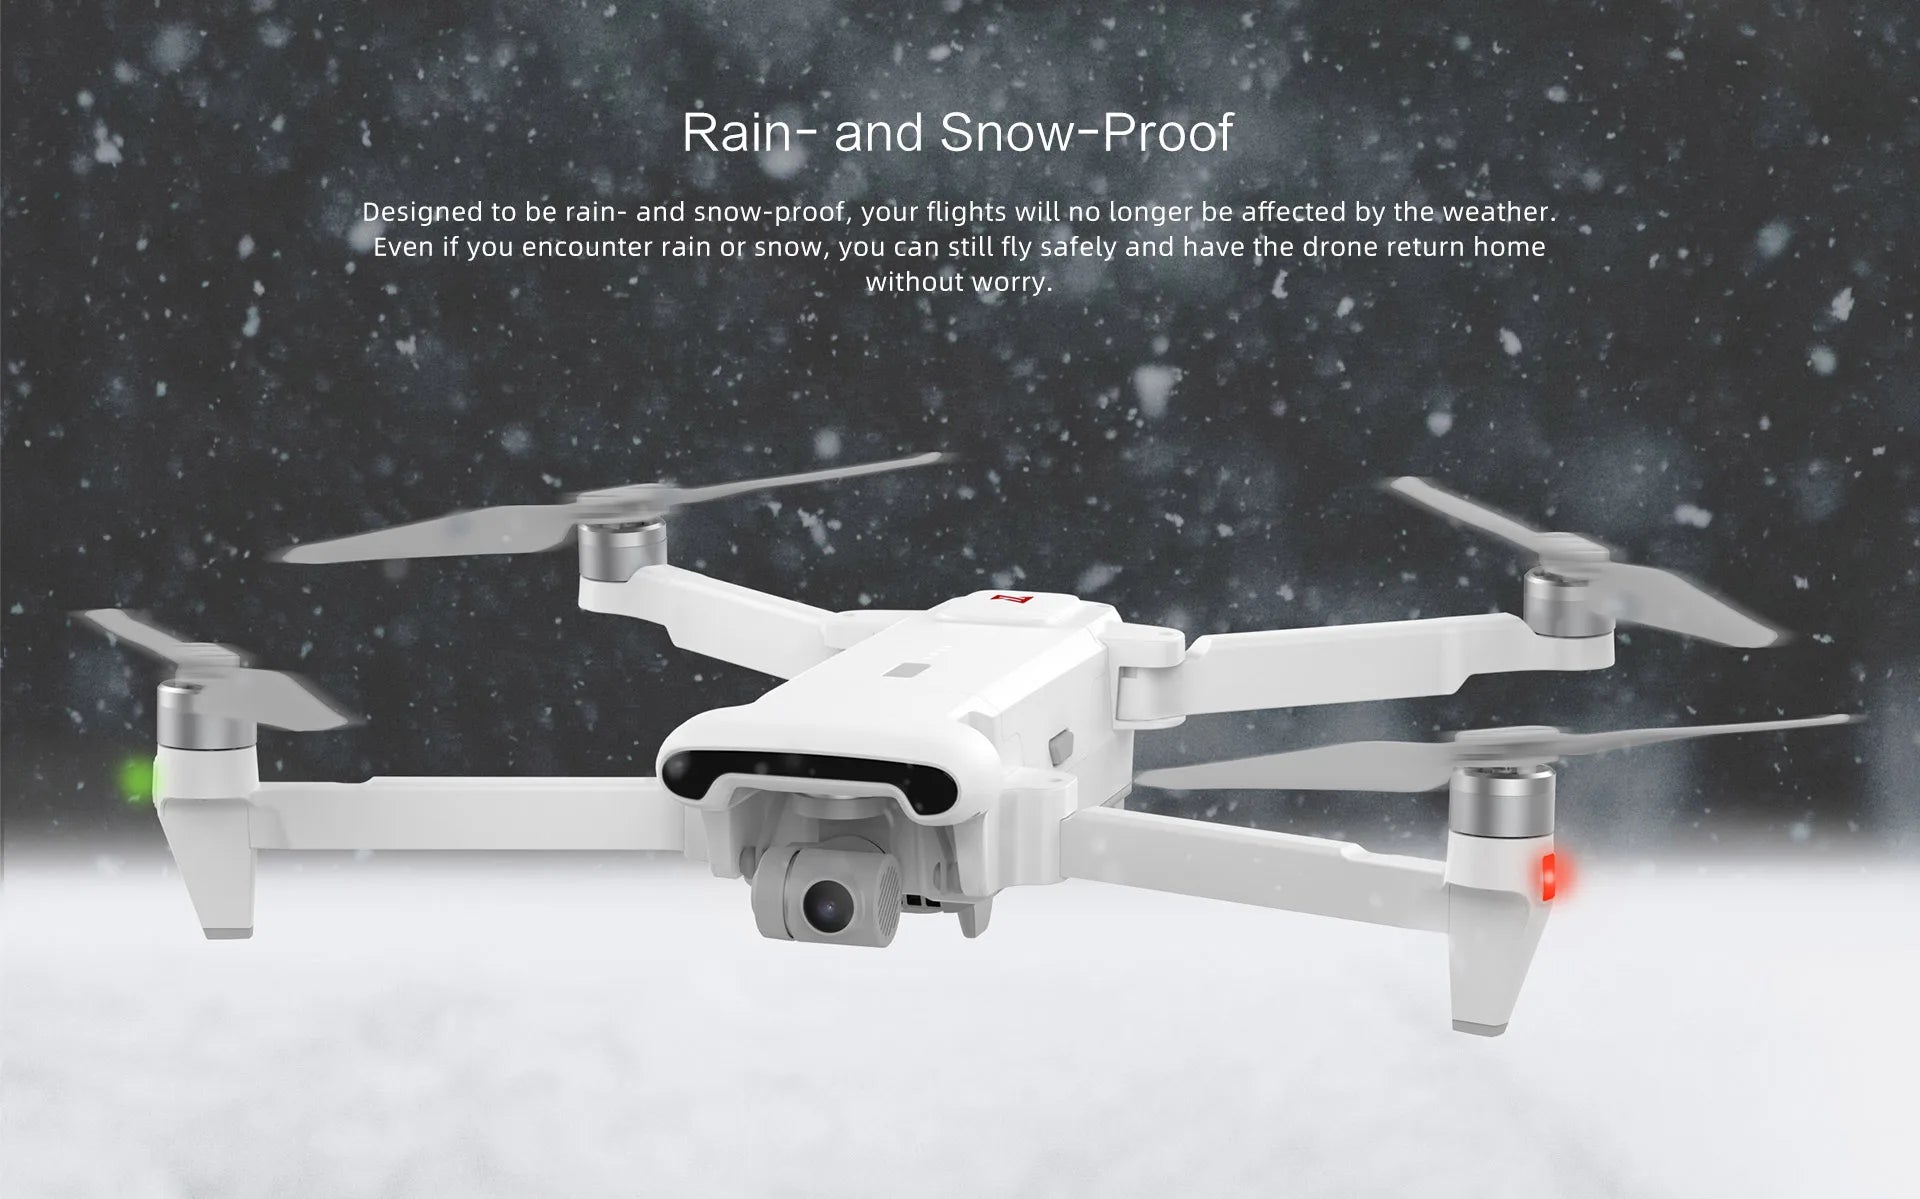 FIMI X8se 2022 V2 Drone, Designed to be rain- and snow-proof your flights will no longer be affected by the